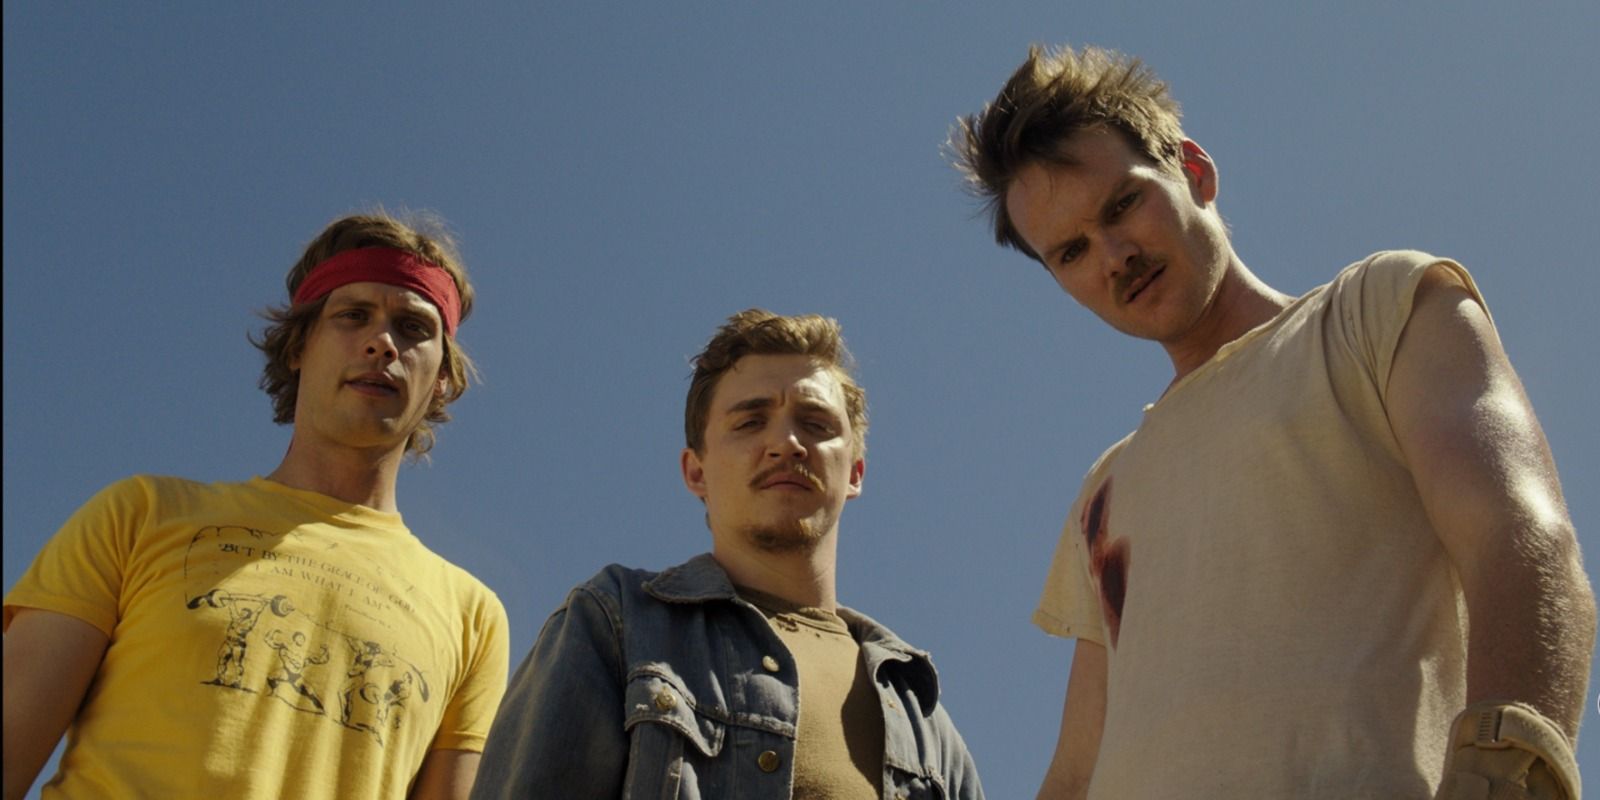 The three main characters in Band of Robbers 